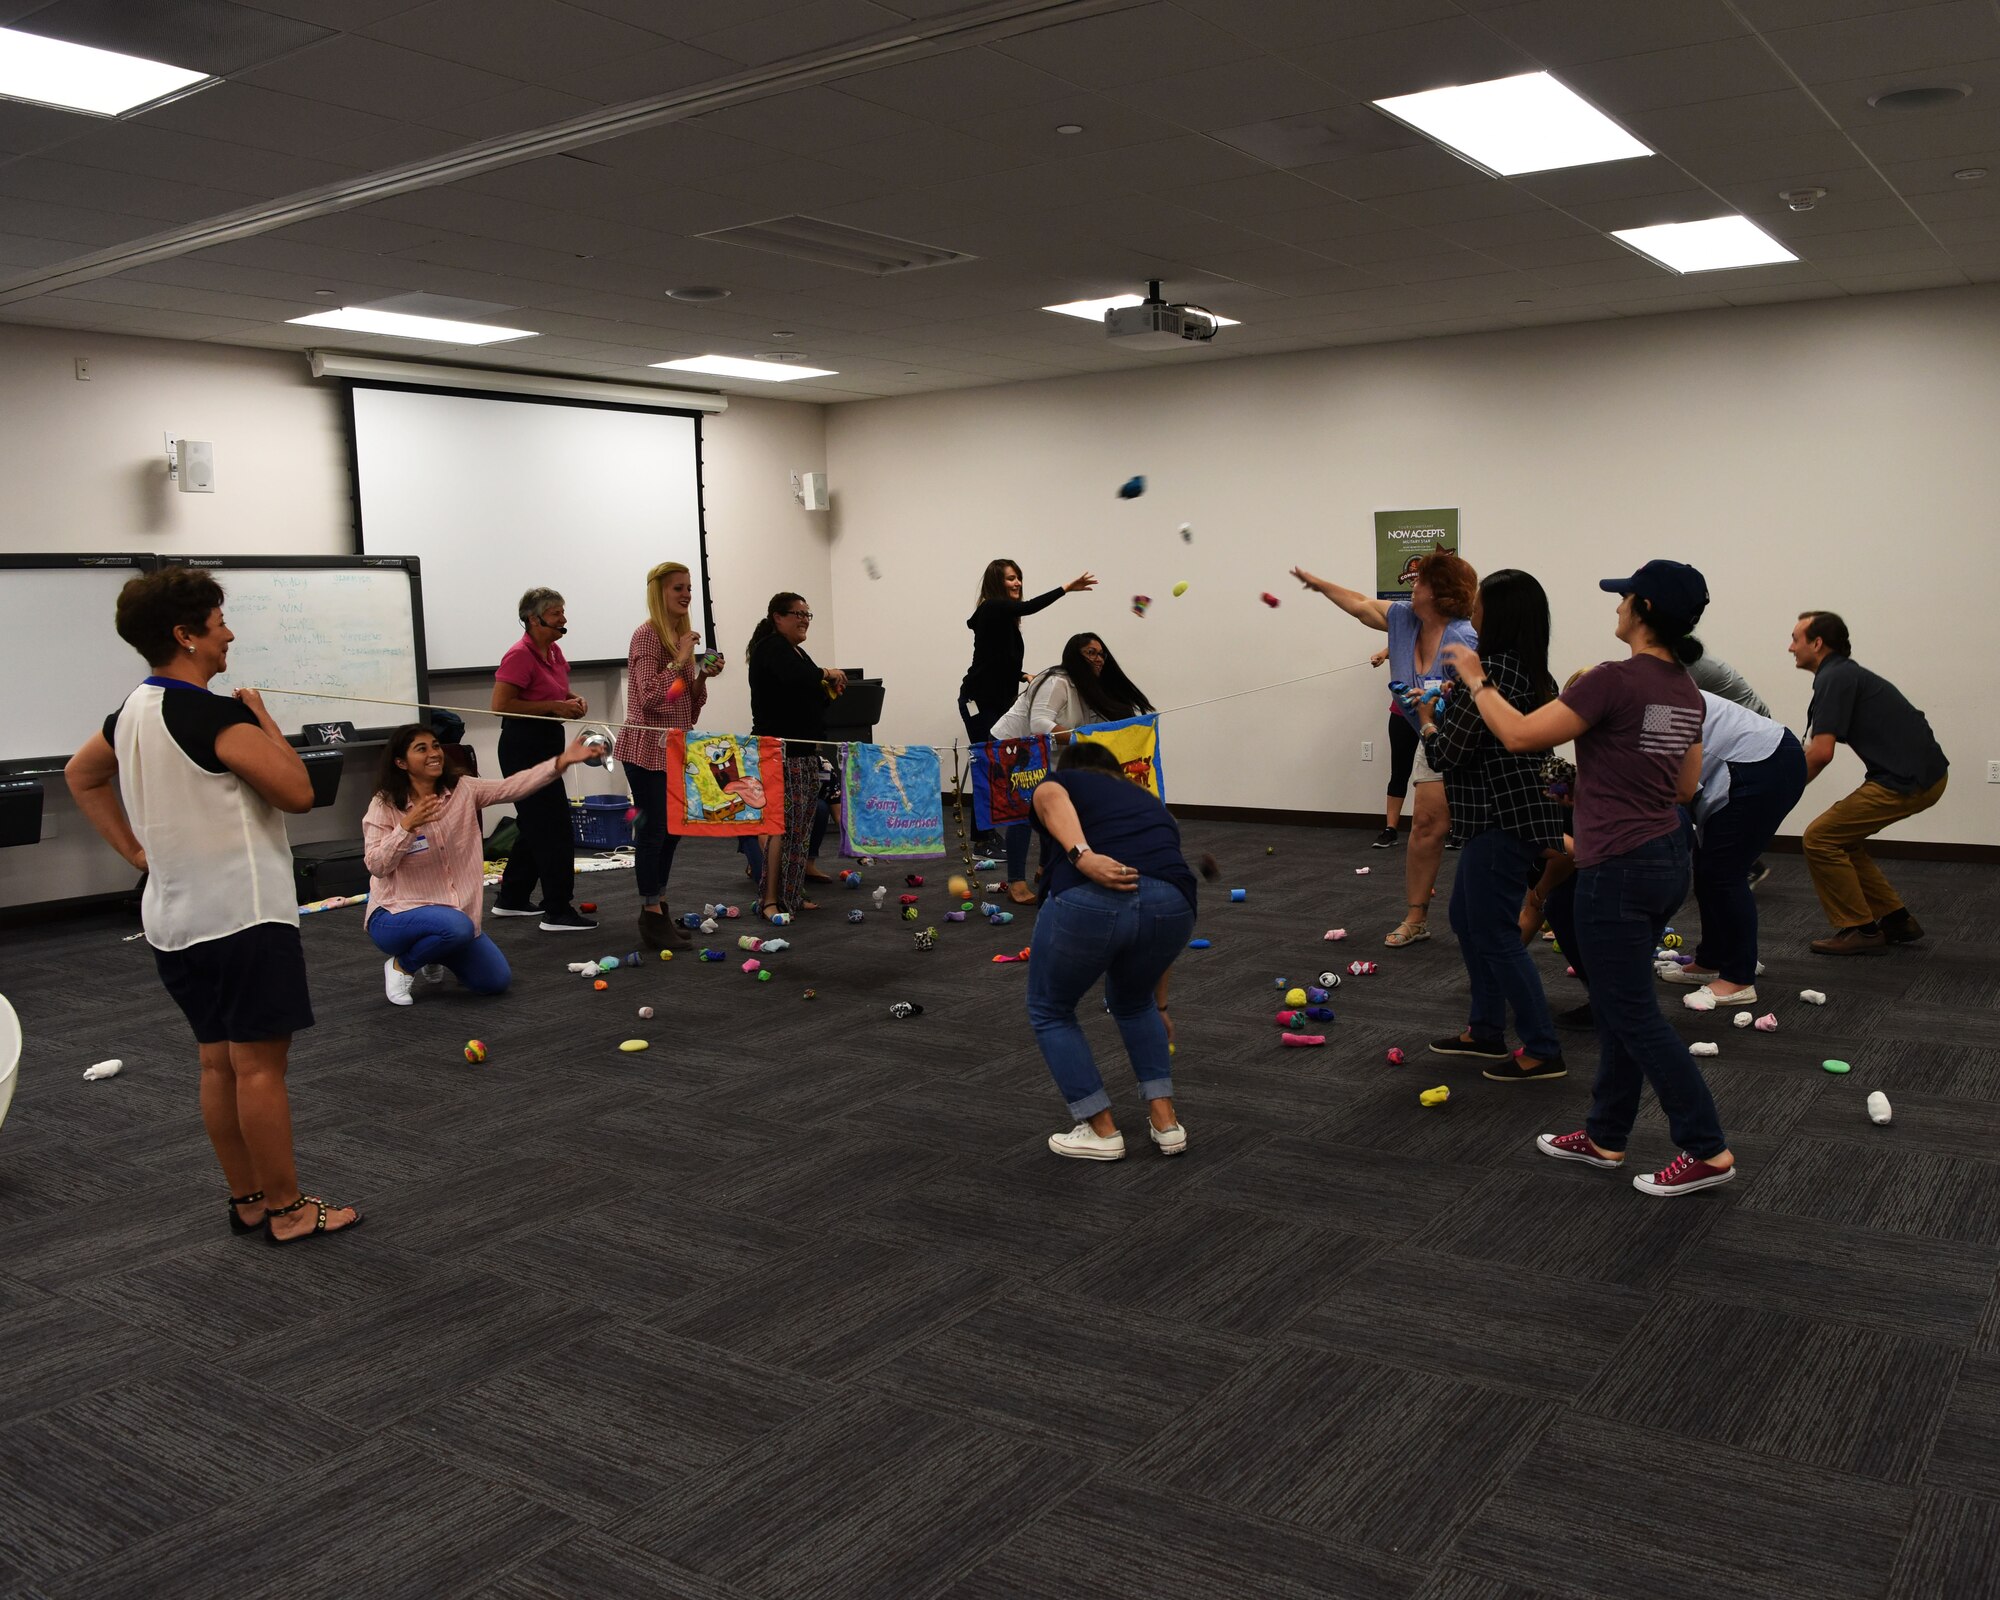 Attendees throw rolled socks during an activity led by Dr. Diane H. Craft, a physical education professor, during a seminar Sept. 5, 2018 at Luke Air Force Base, Ariz.